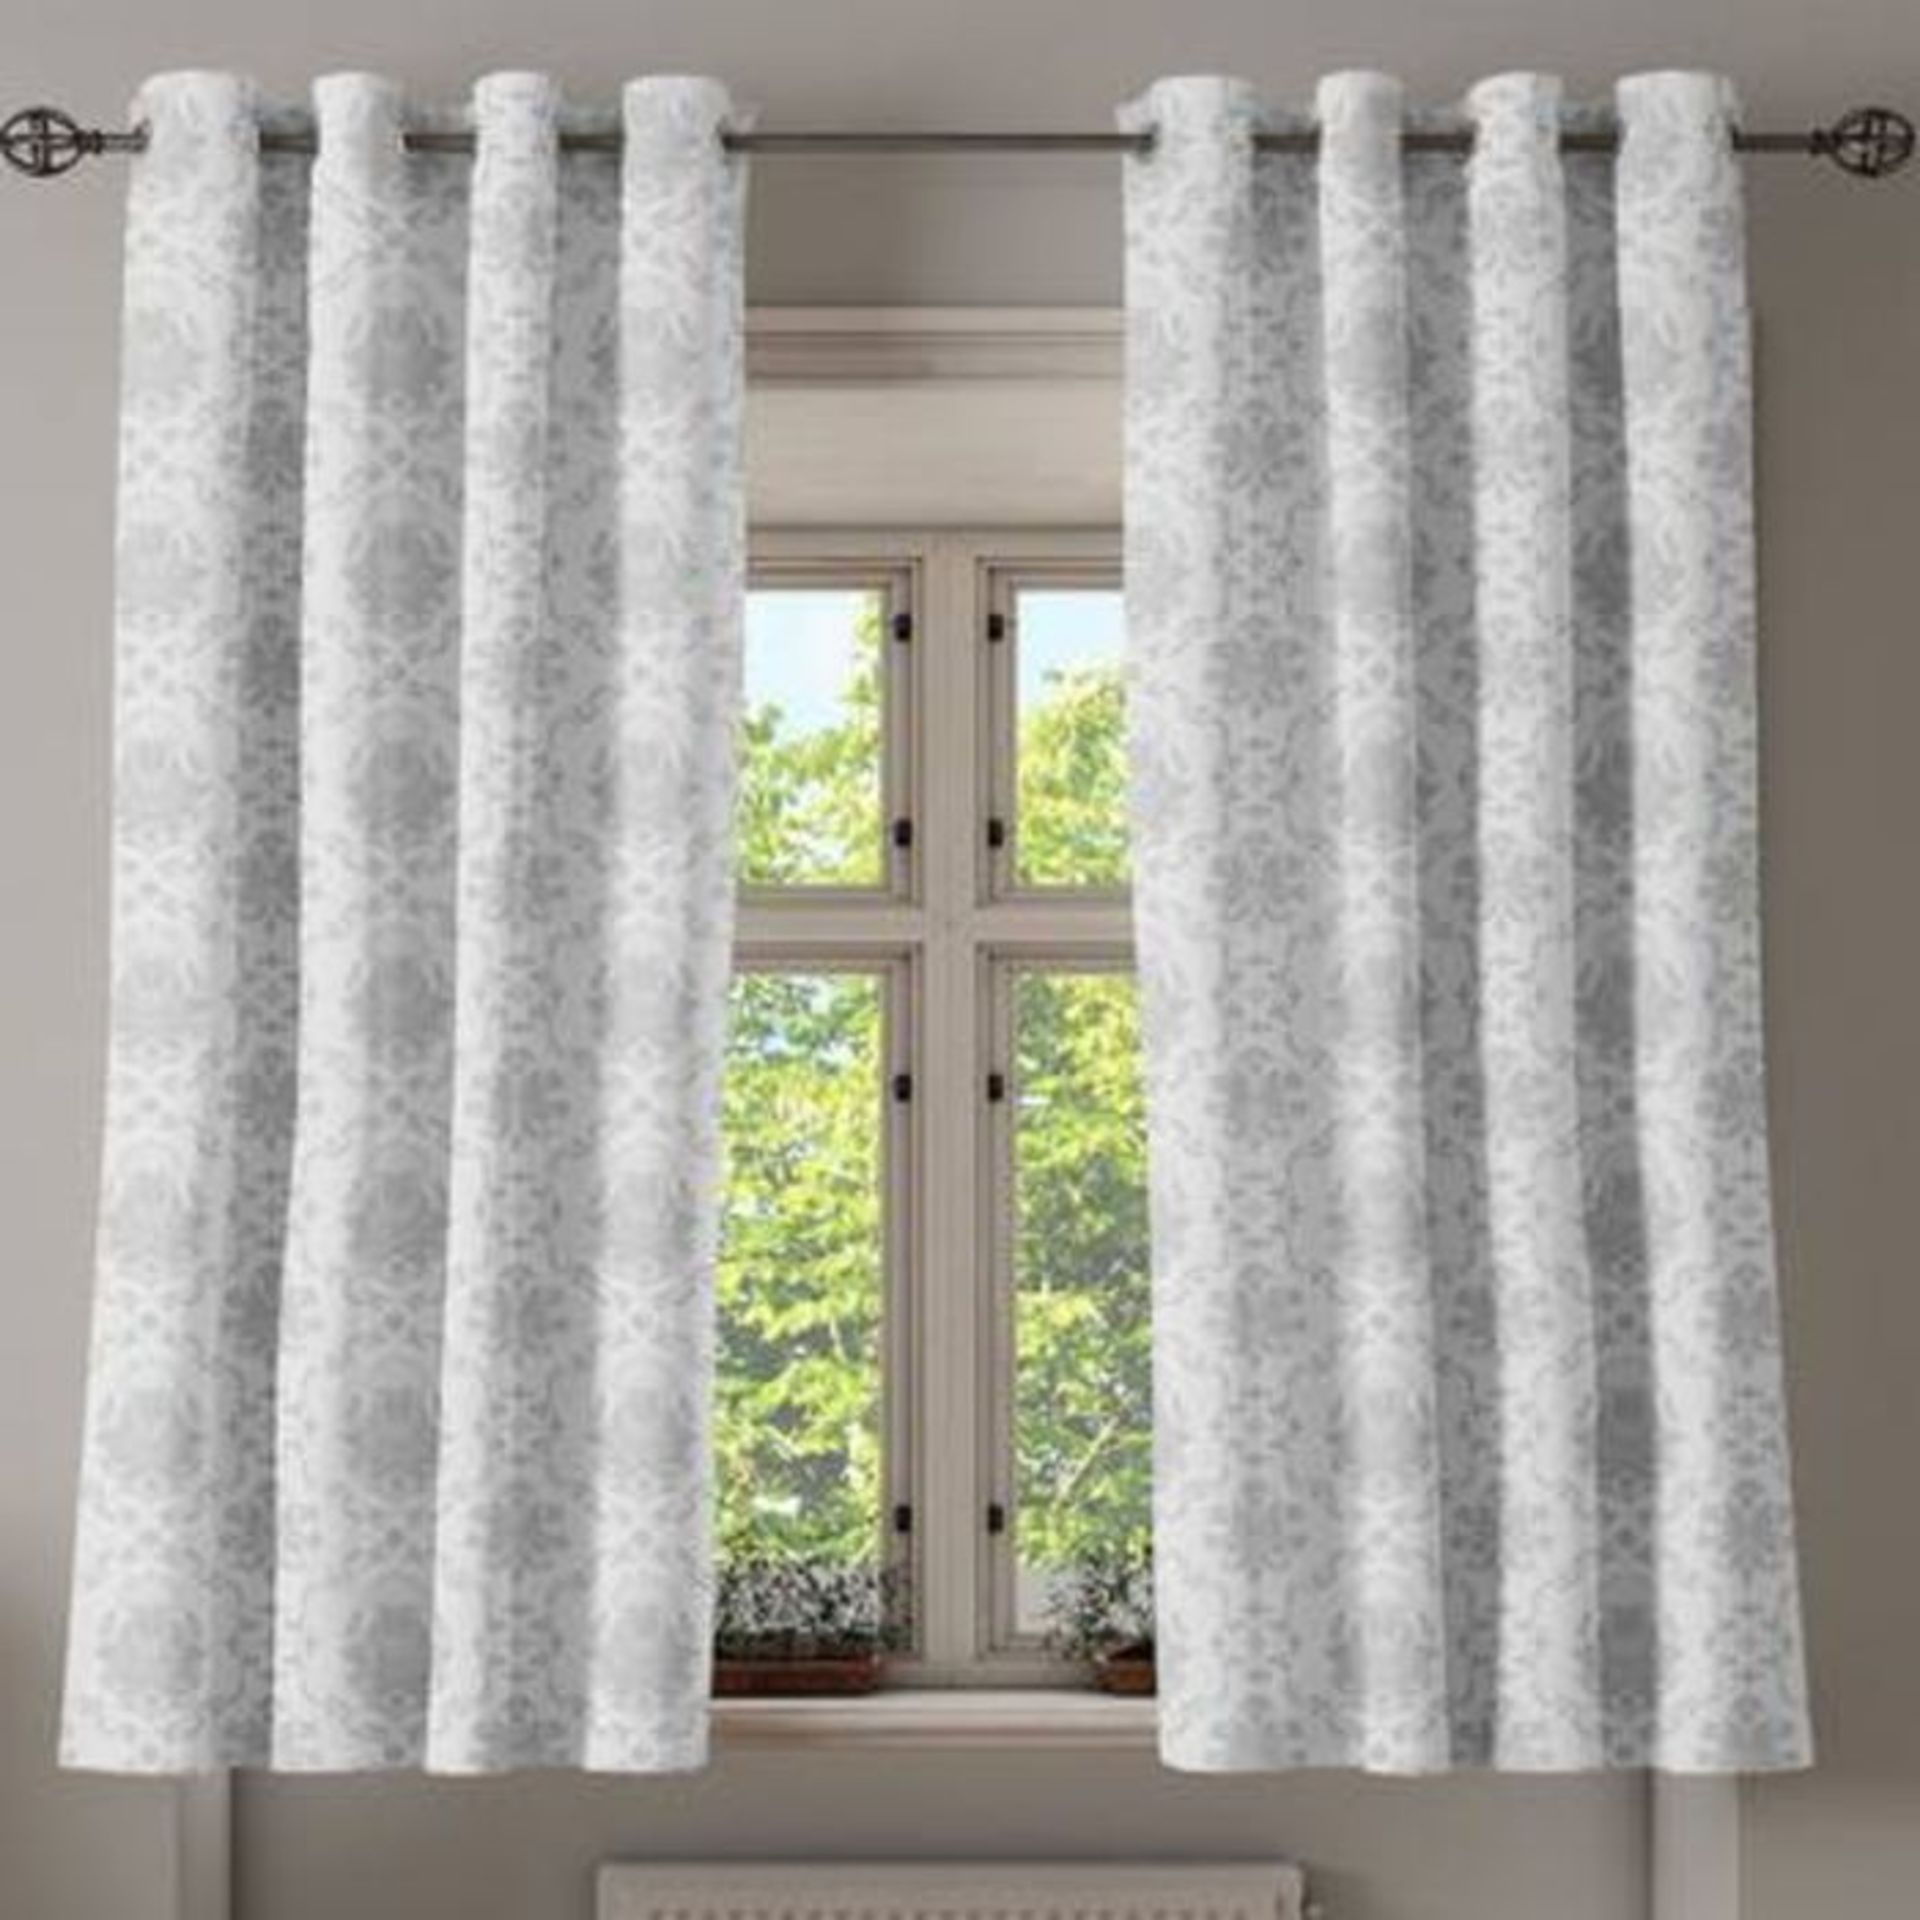 Astoria Grand, Napolitano Victorian Tulips Eyelet Semi Sheer Thermal Curtains (WHITE/GREY) (SIZE - Image 2 of 4